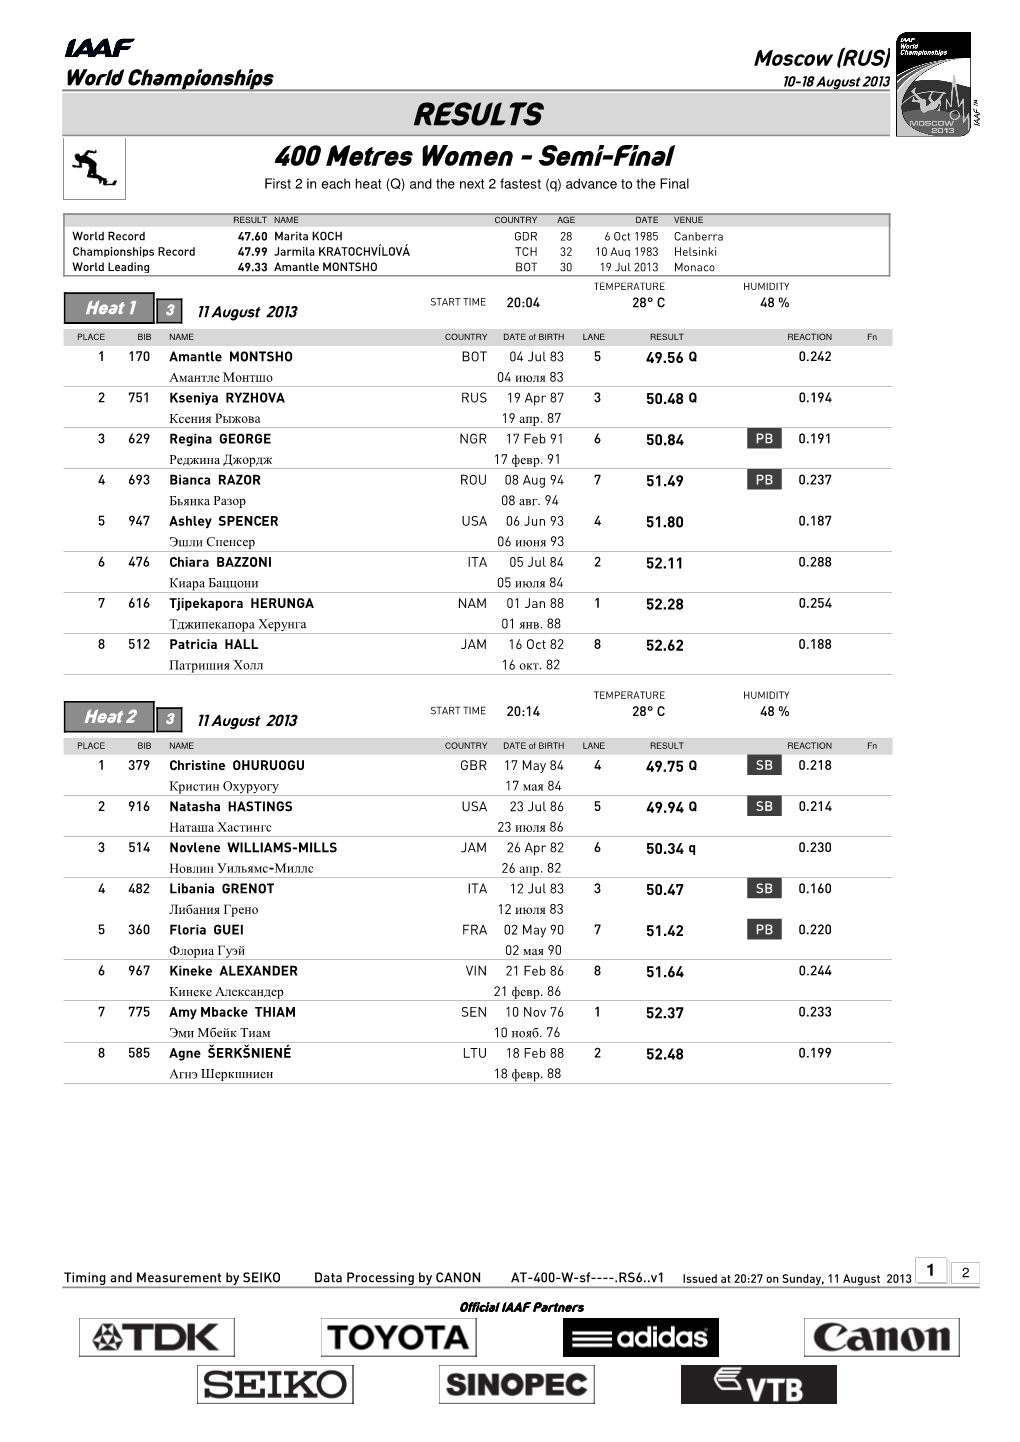 RESULTS 400 Metres Women - Semi-Final First 2 in Each Heat (Q) and the Next 2 Fastest (Q) Advance to the Final